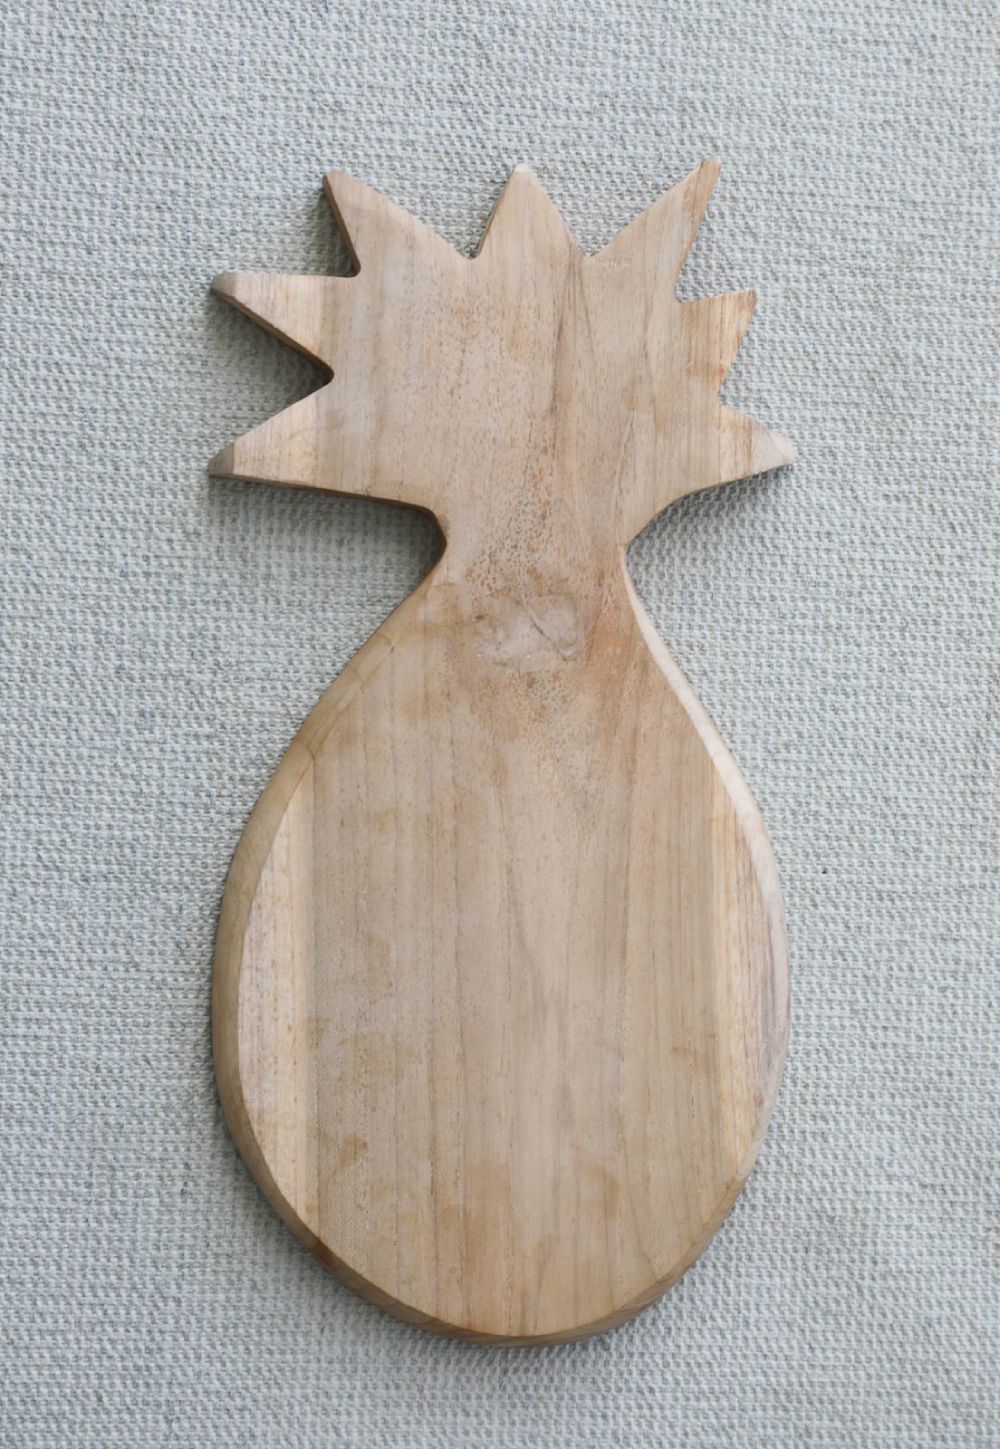 Pineapple Shape Wooden Serving Tray